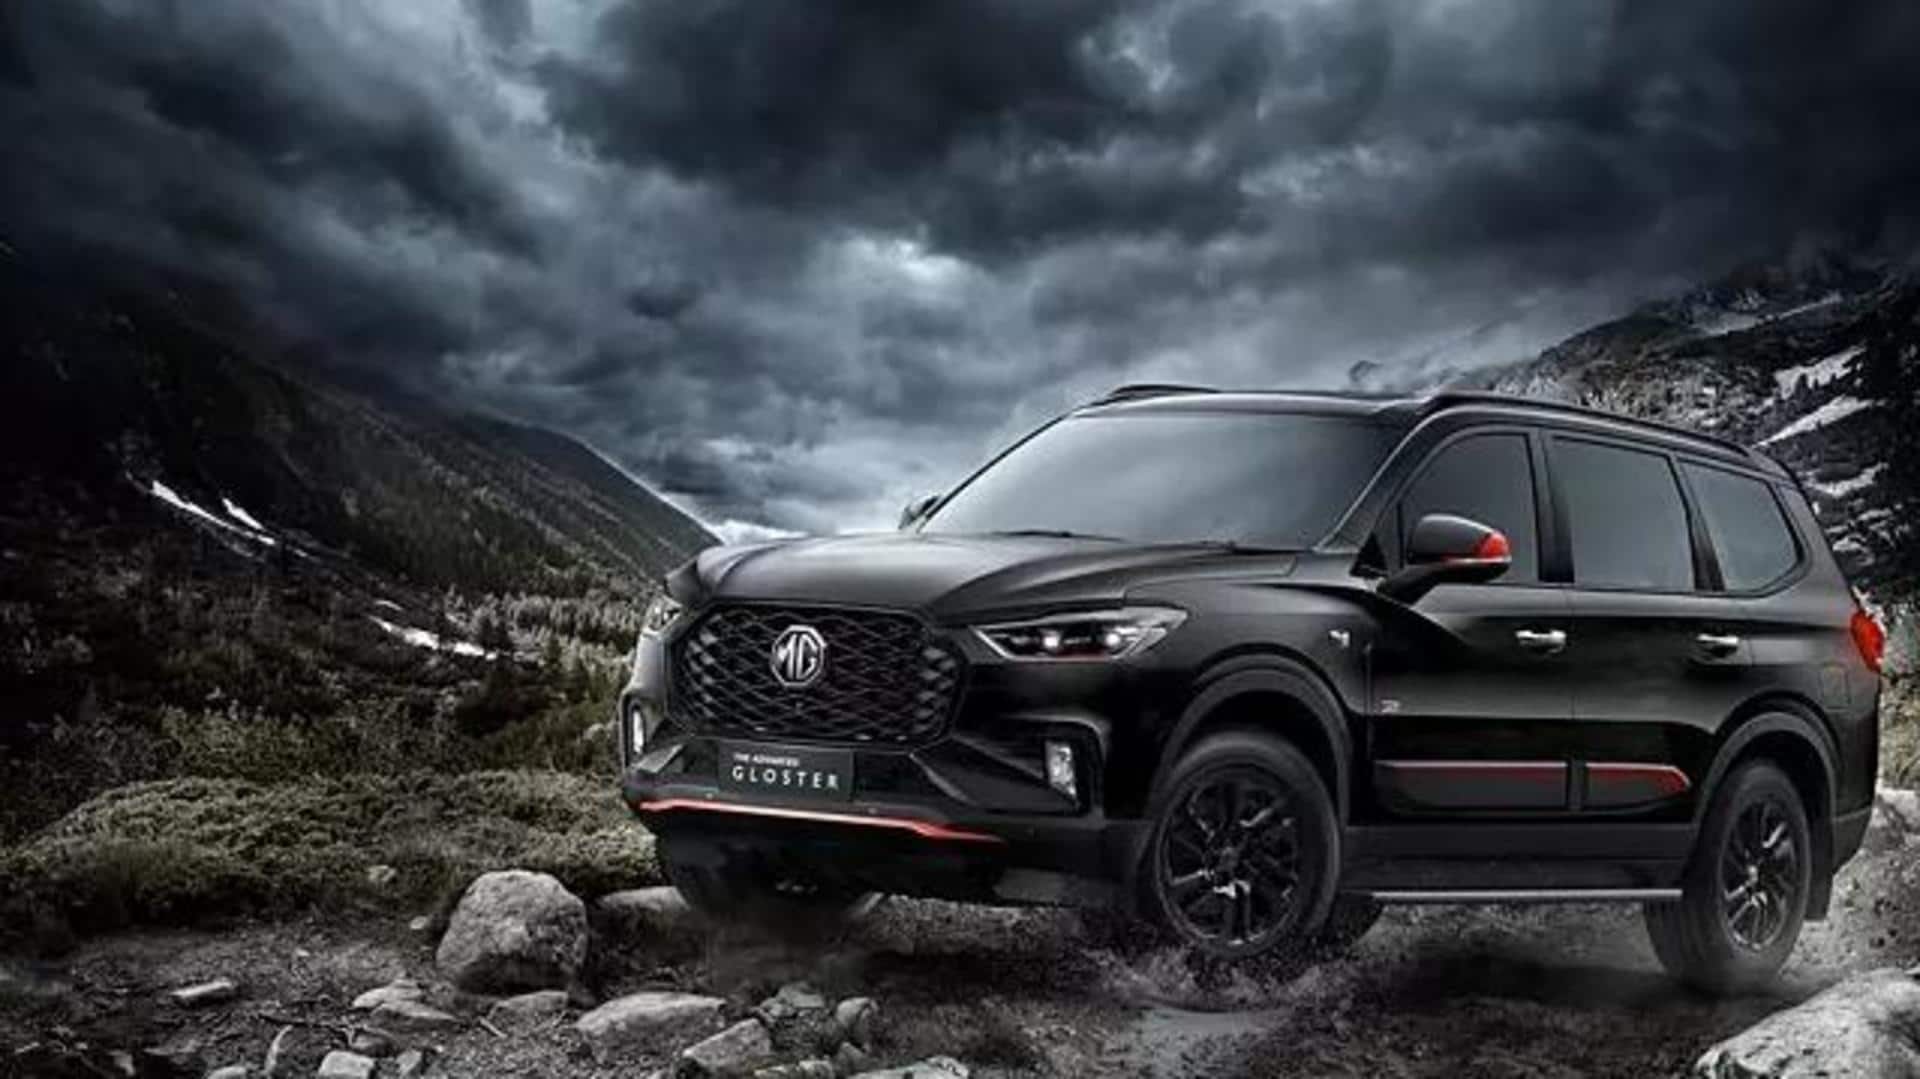 MG Gloster Black Storm launched at Rs. 40.3 lakh